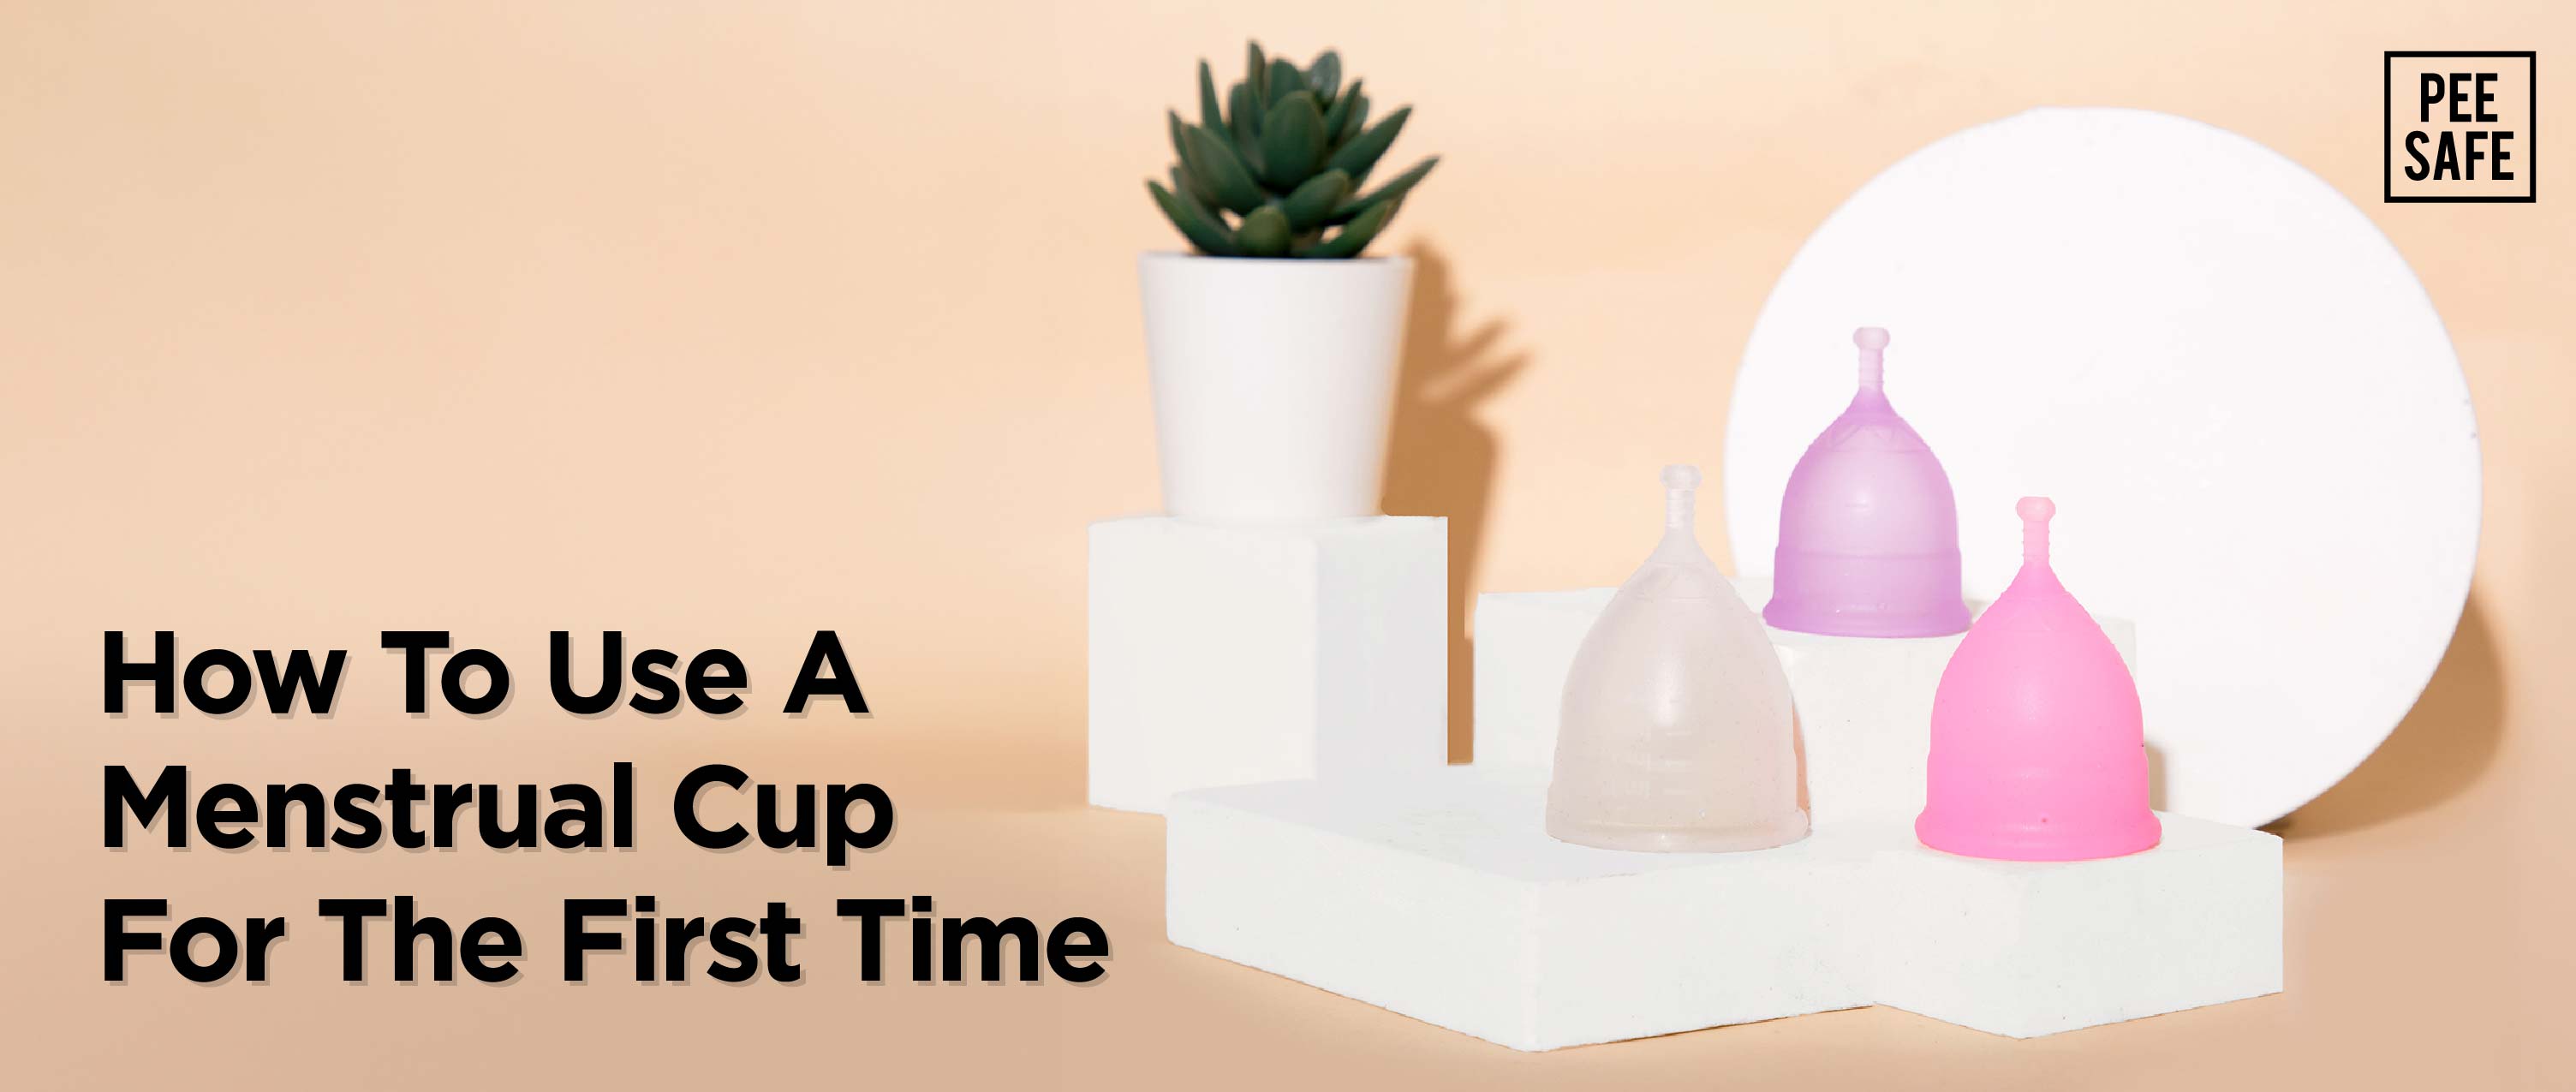 How To Use A Menstrual Cup For The First Time